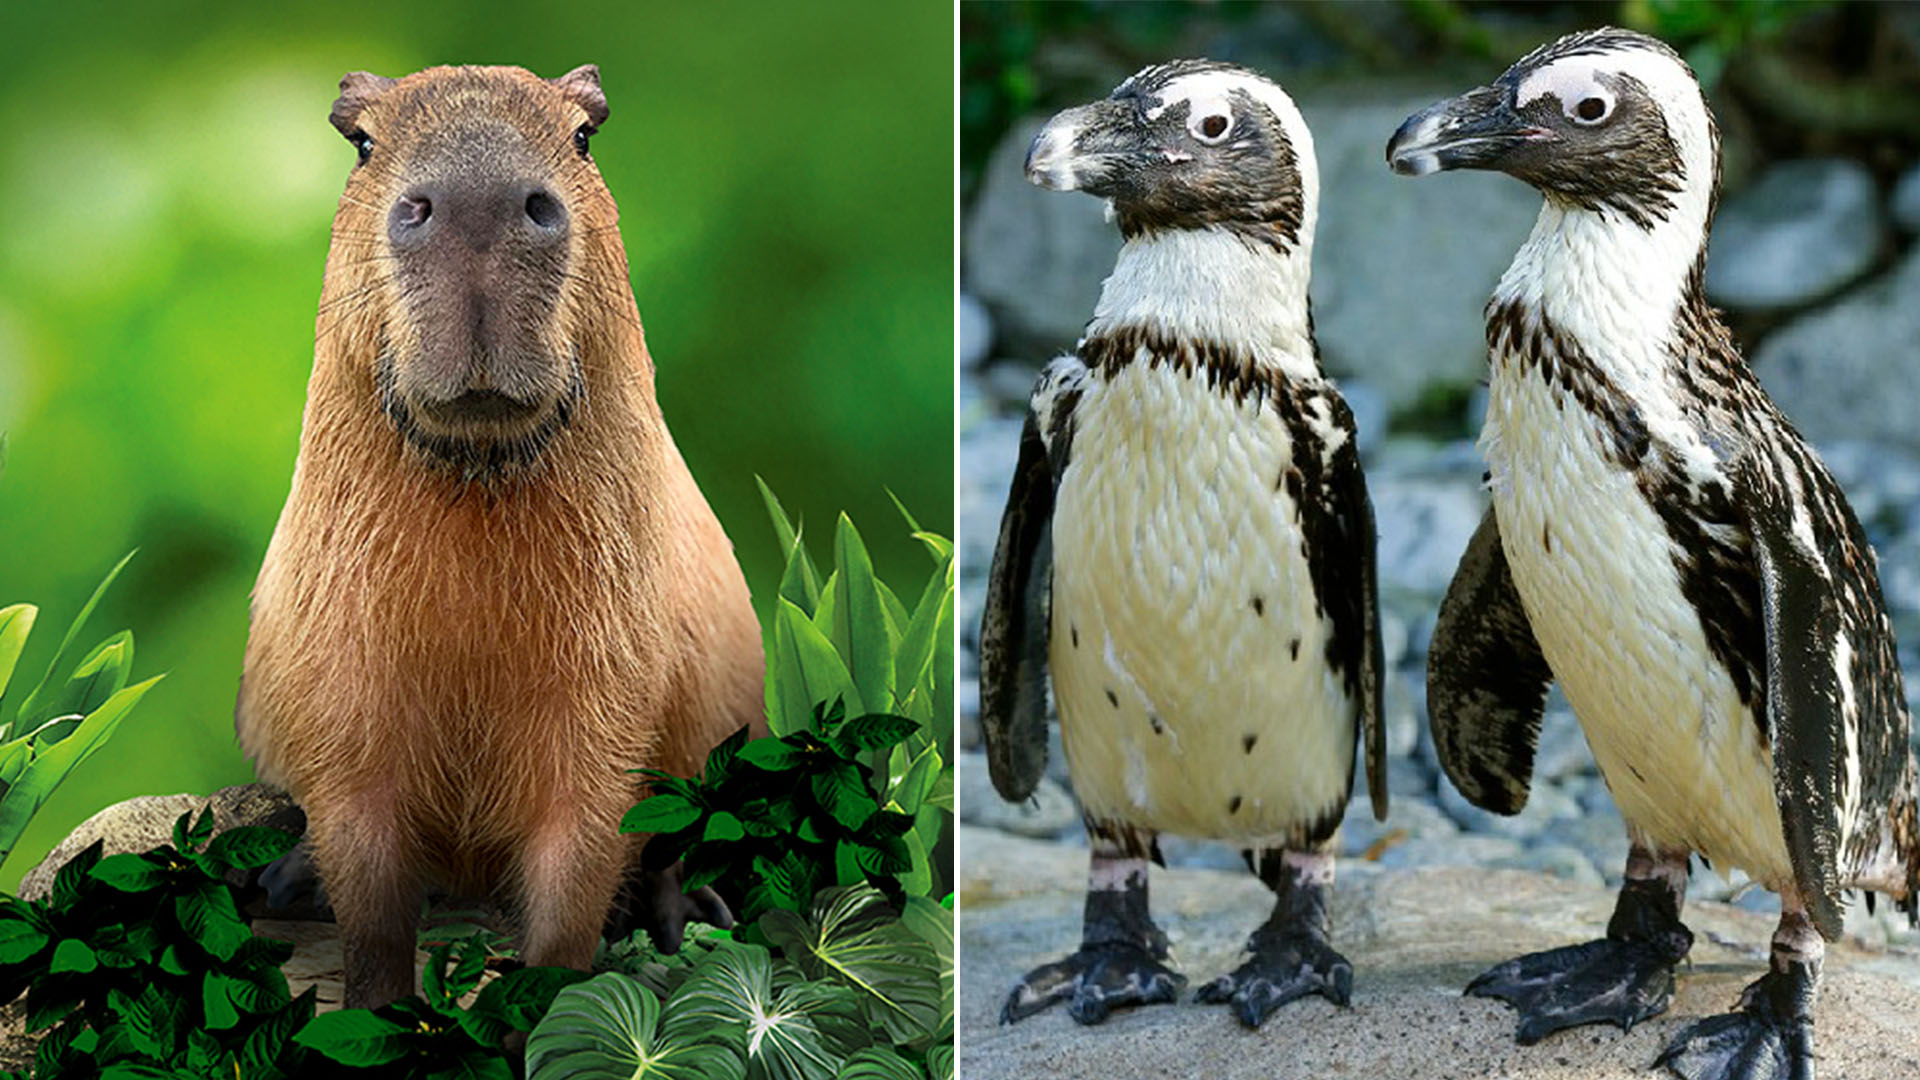 Get Up Close With Zoo & Bird Park Animals In Virtual Sessions That Cost $50  Or More - 8days